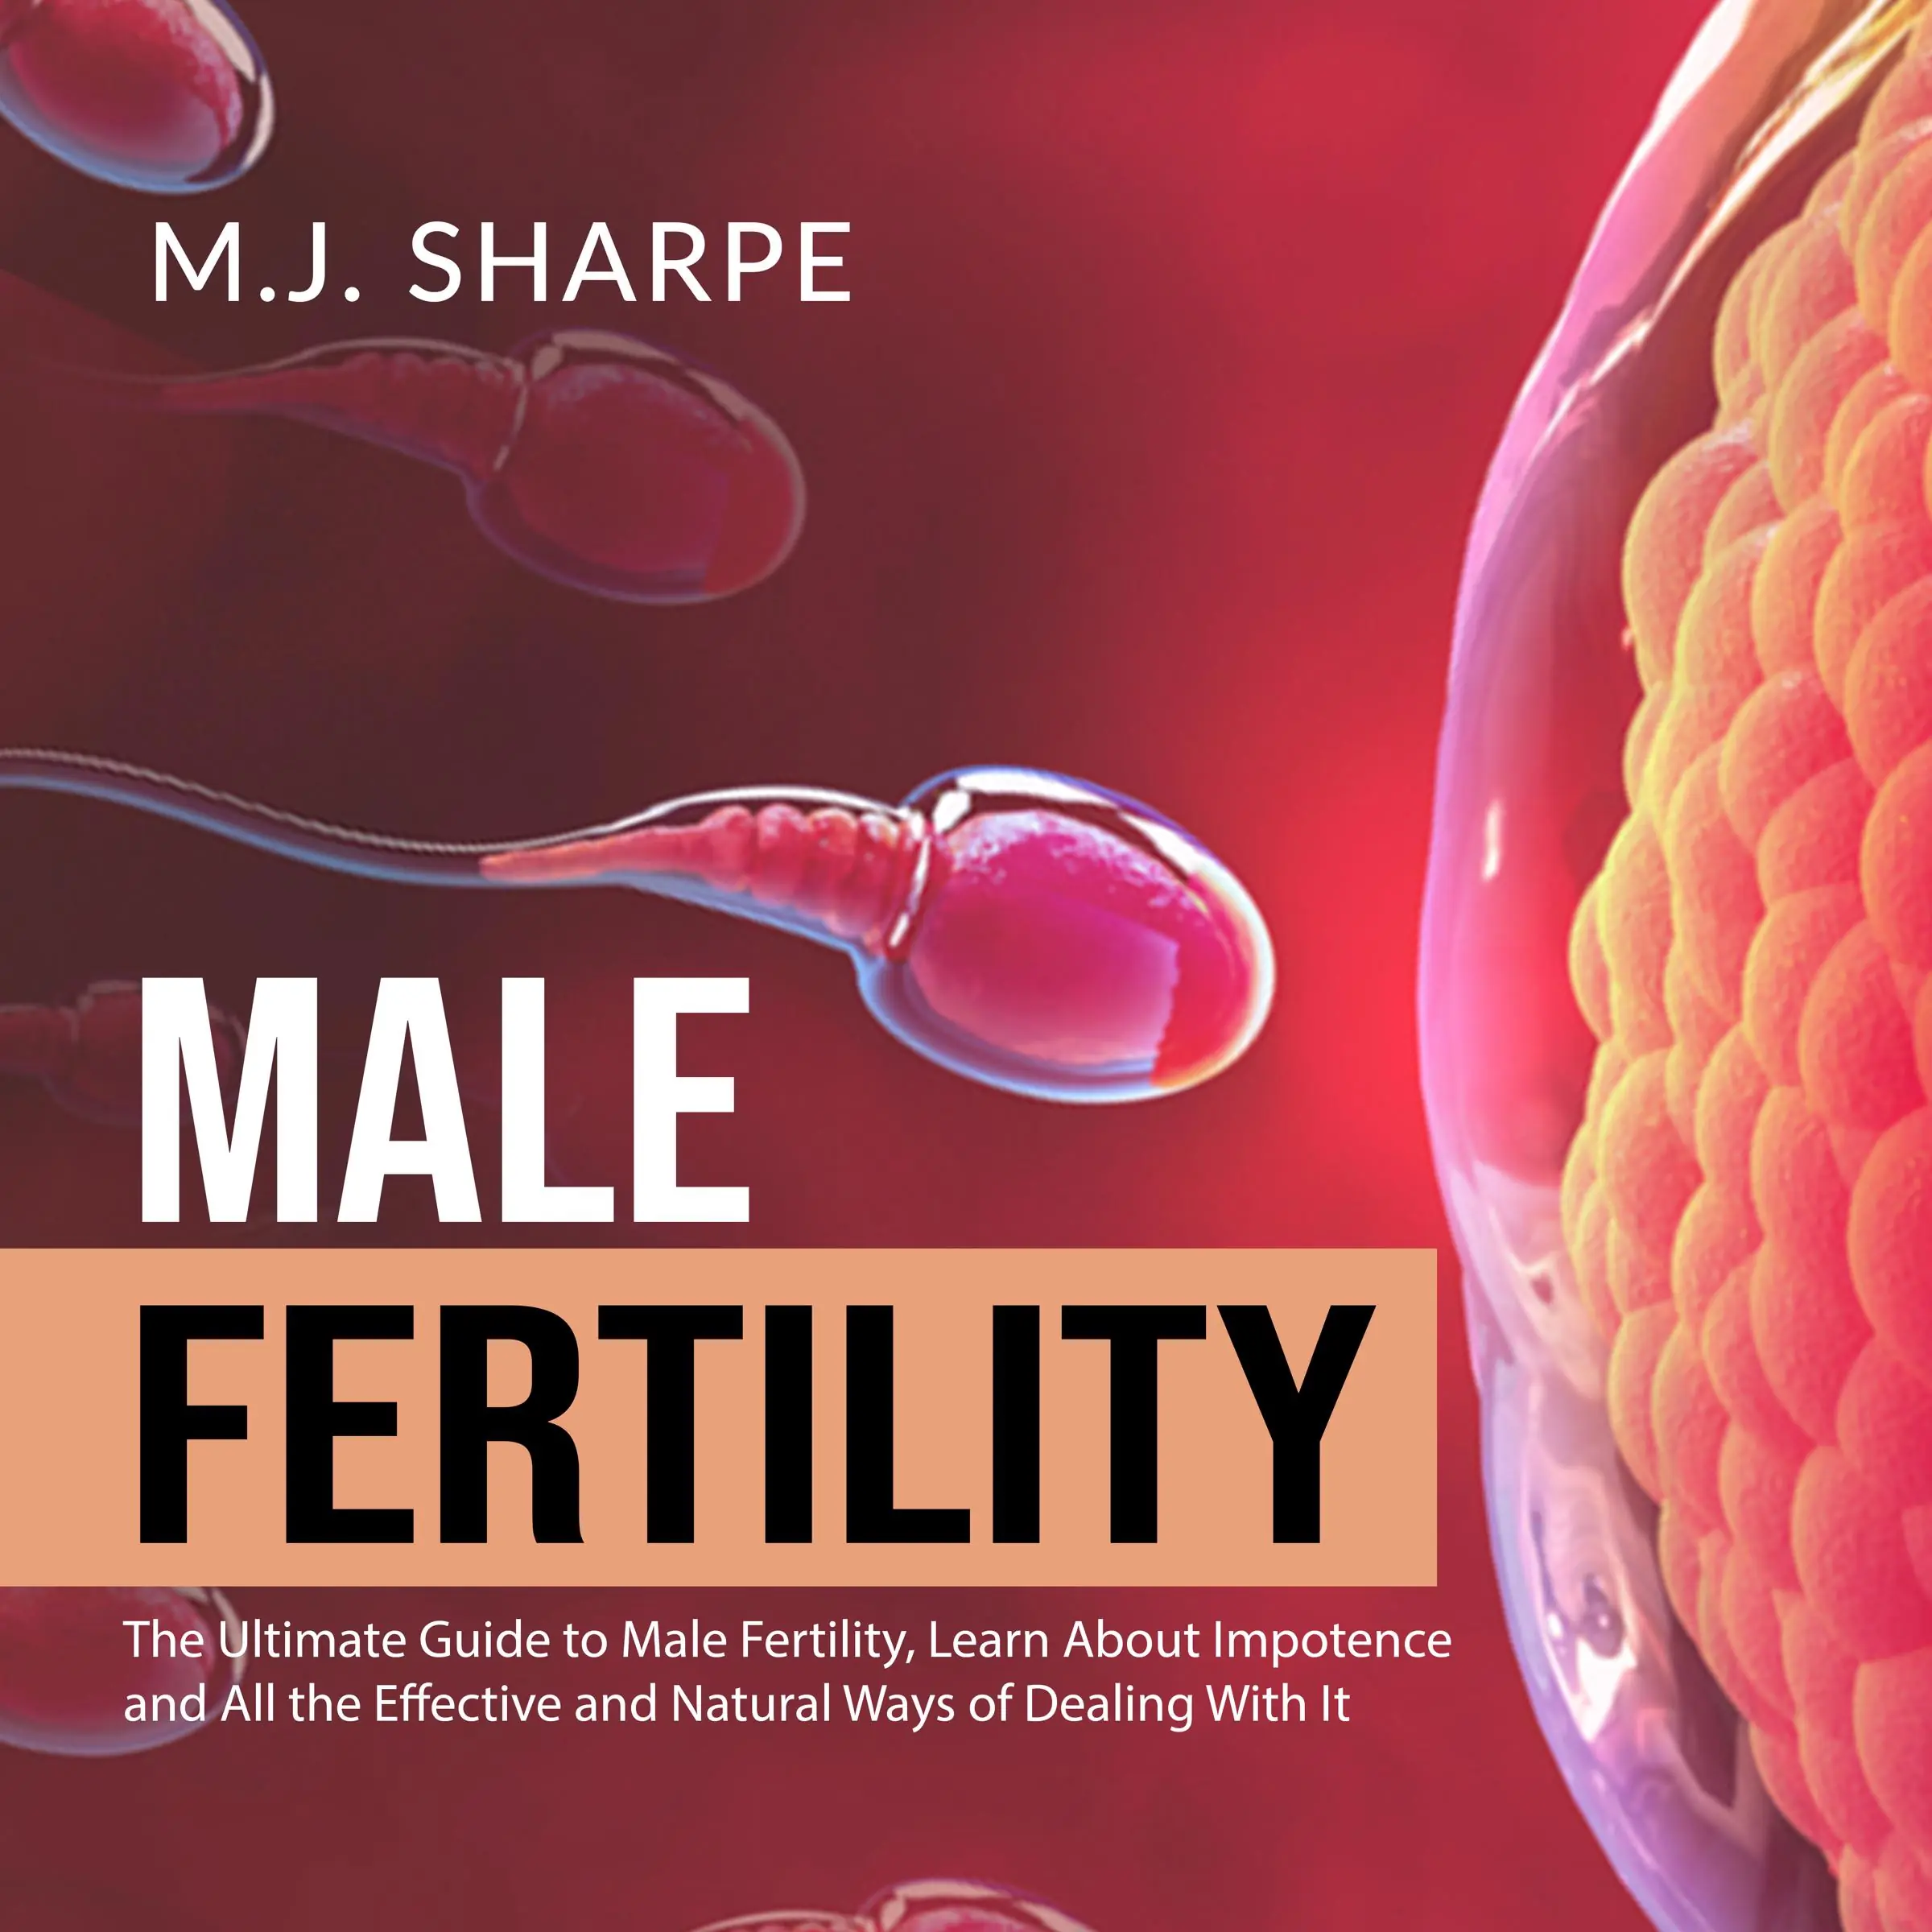 Male Fertility: The Ultimate Guide to Male Fertility, Learn About Impotence and All the Effective and Natural Ways of Dealing With It Audiobook by M.J. Sharpe